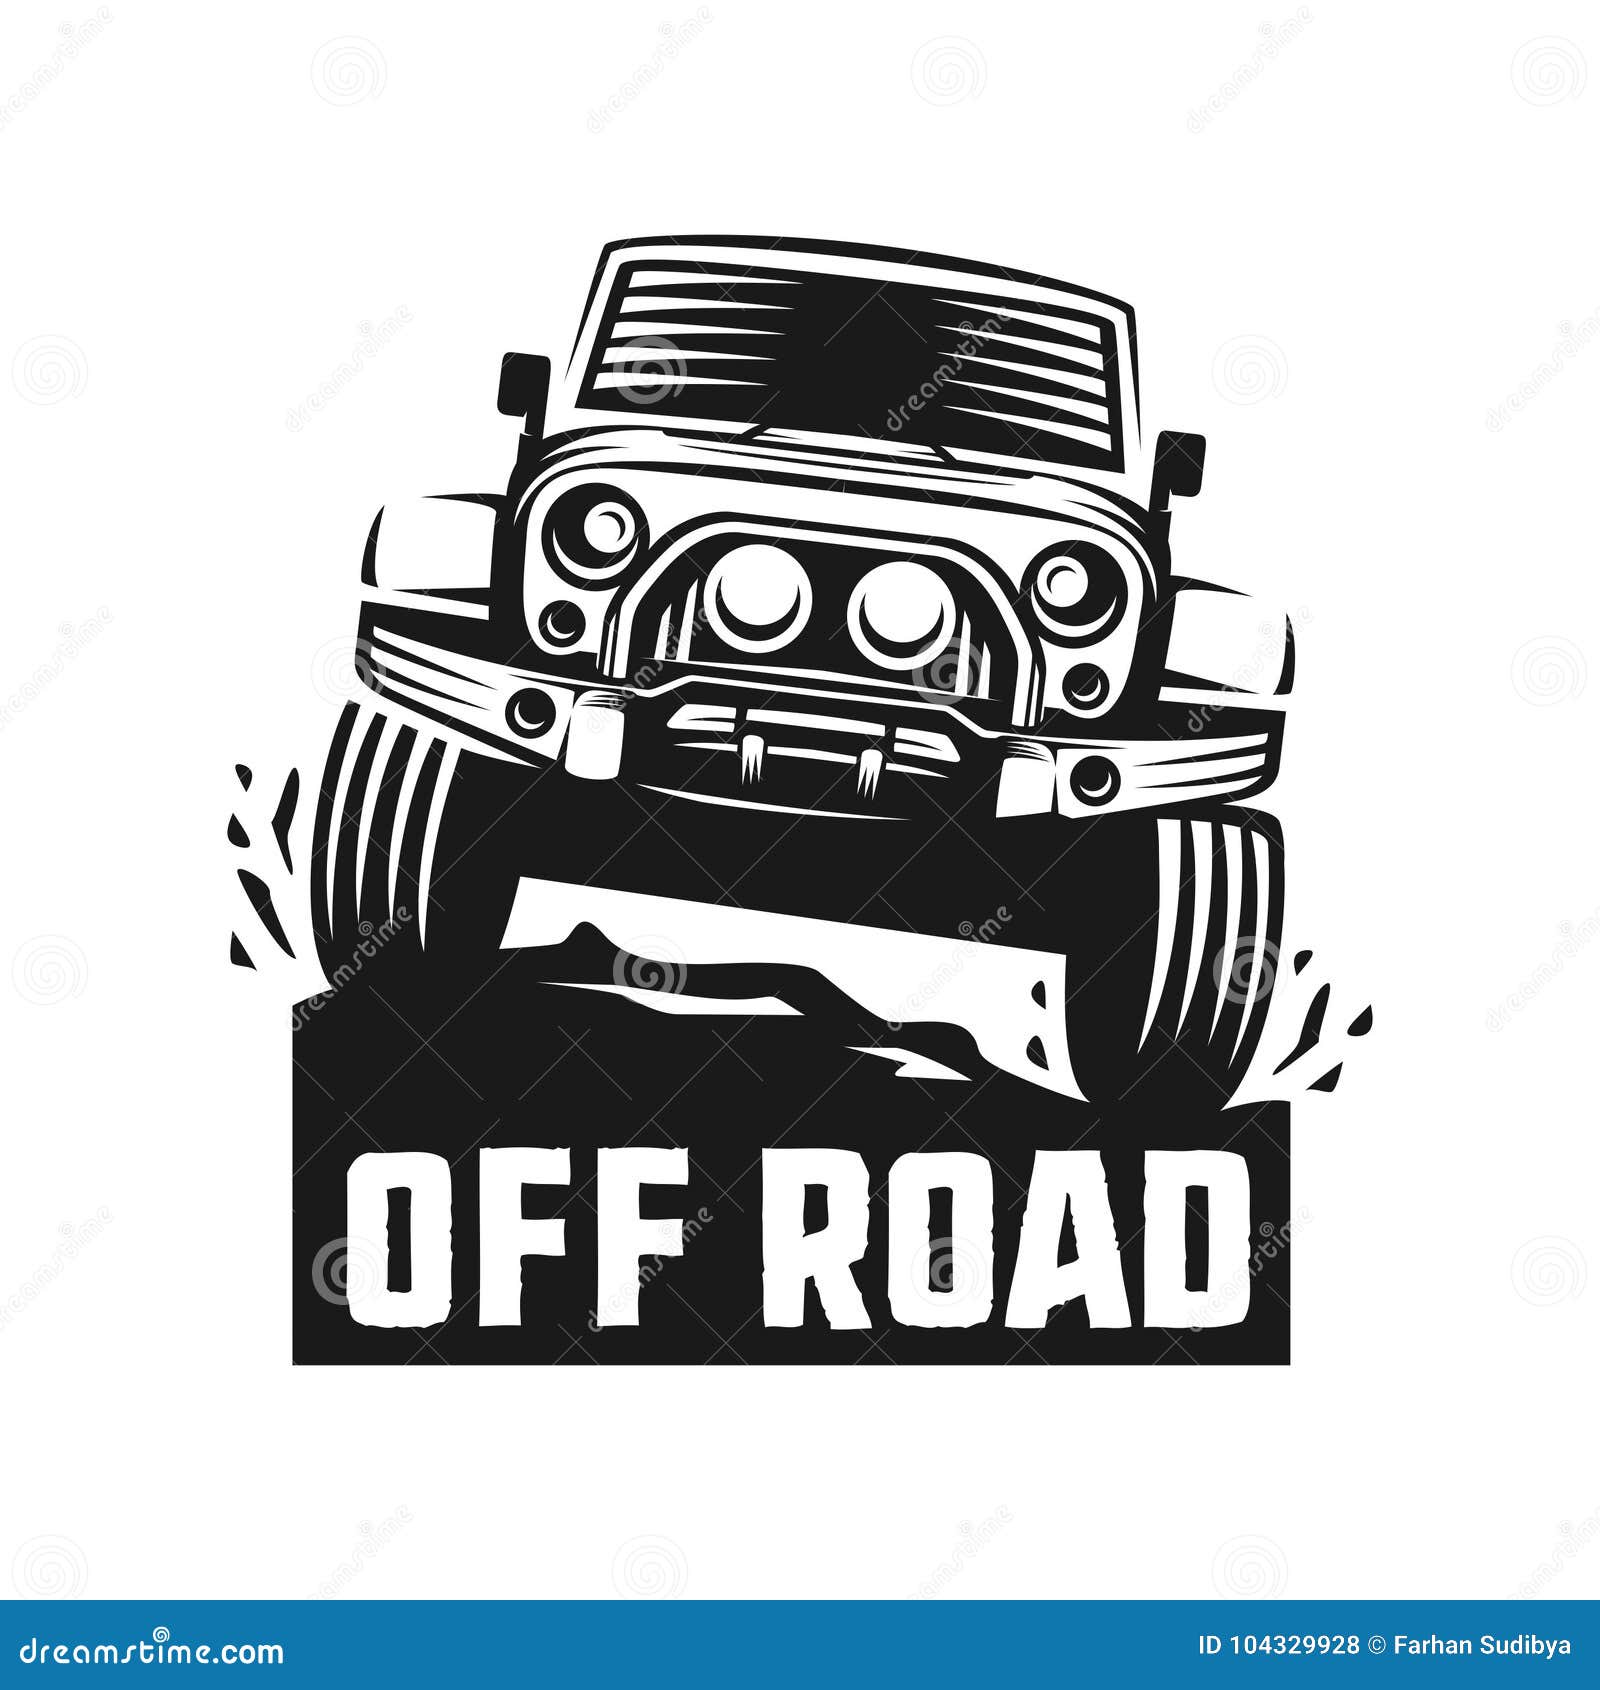 off road suv car monochrome template for labels, emblems, badges or logos